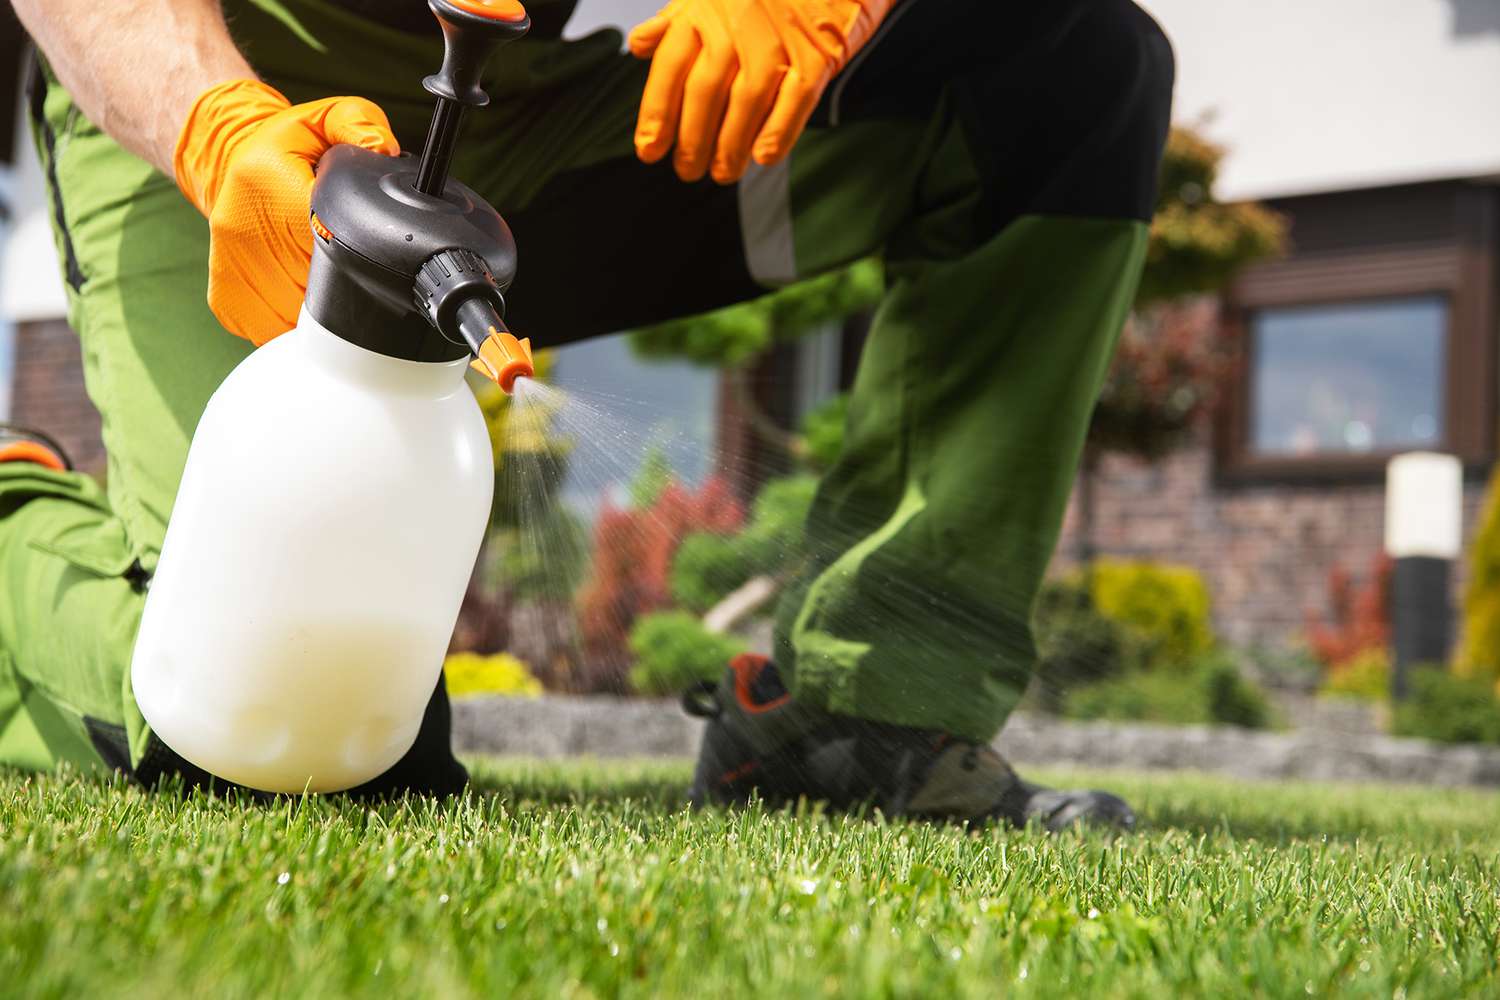 person treating lawn with weed killer spray